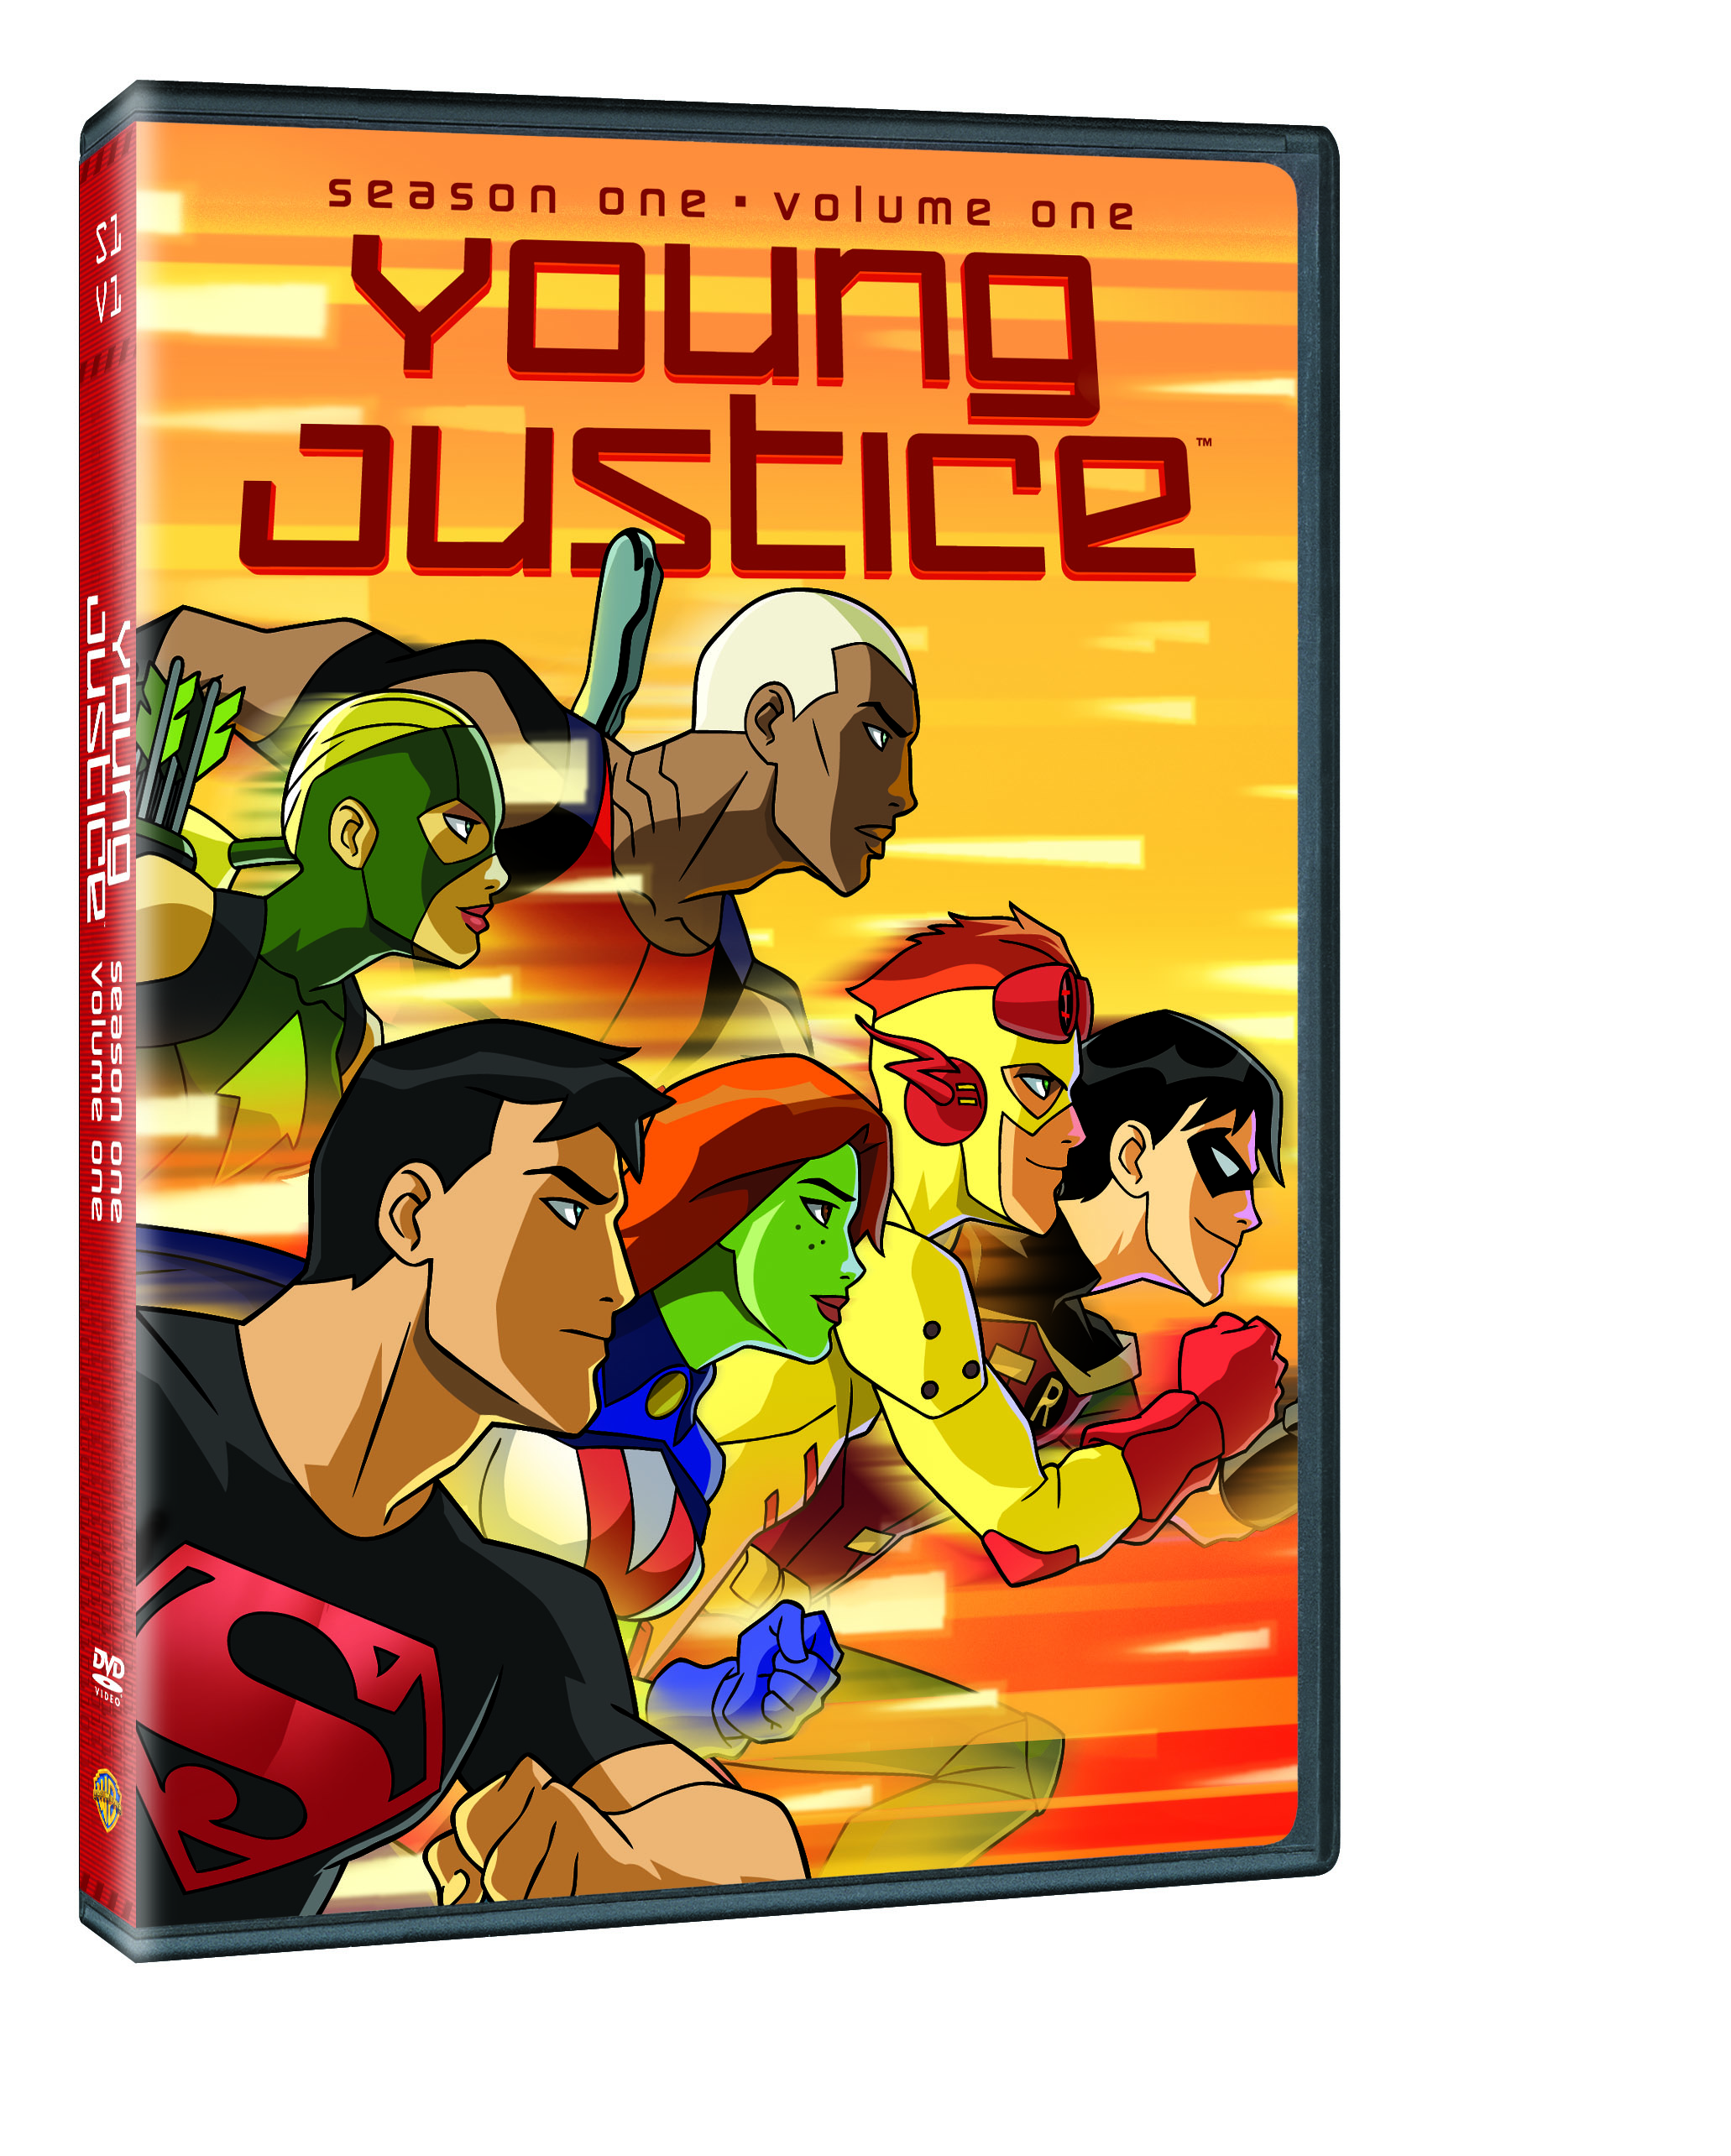 Young Justice Season 1 Volume 1 Cover Art